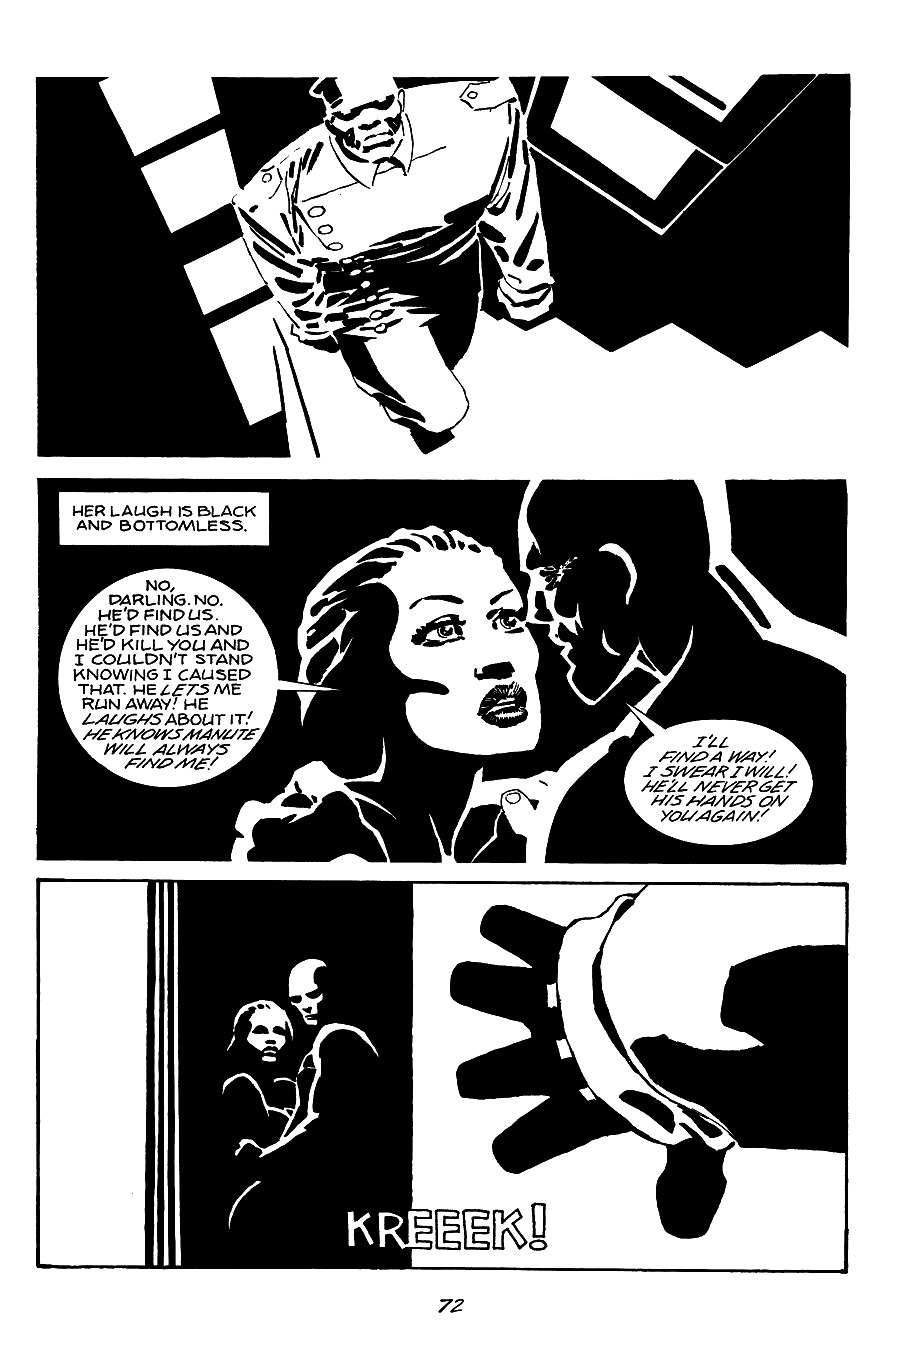 page 72 of sin city 2 the hard goodbye